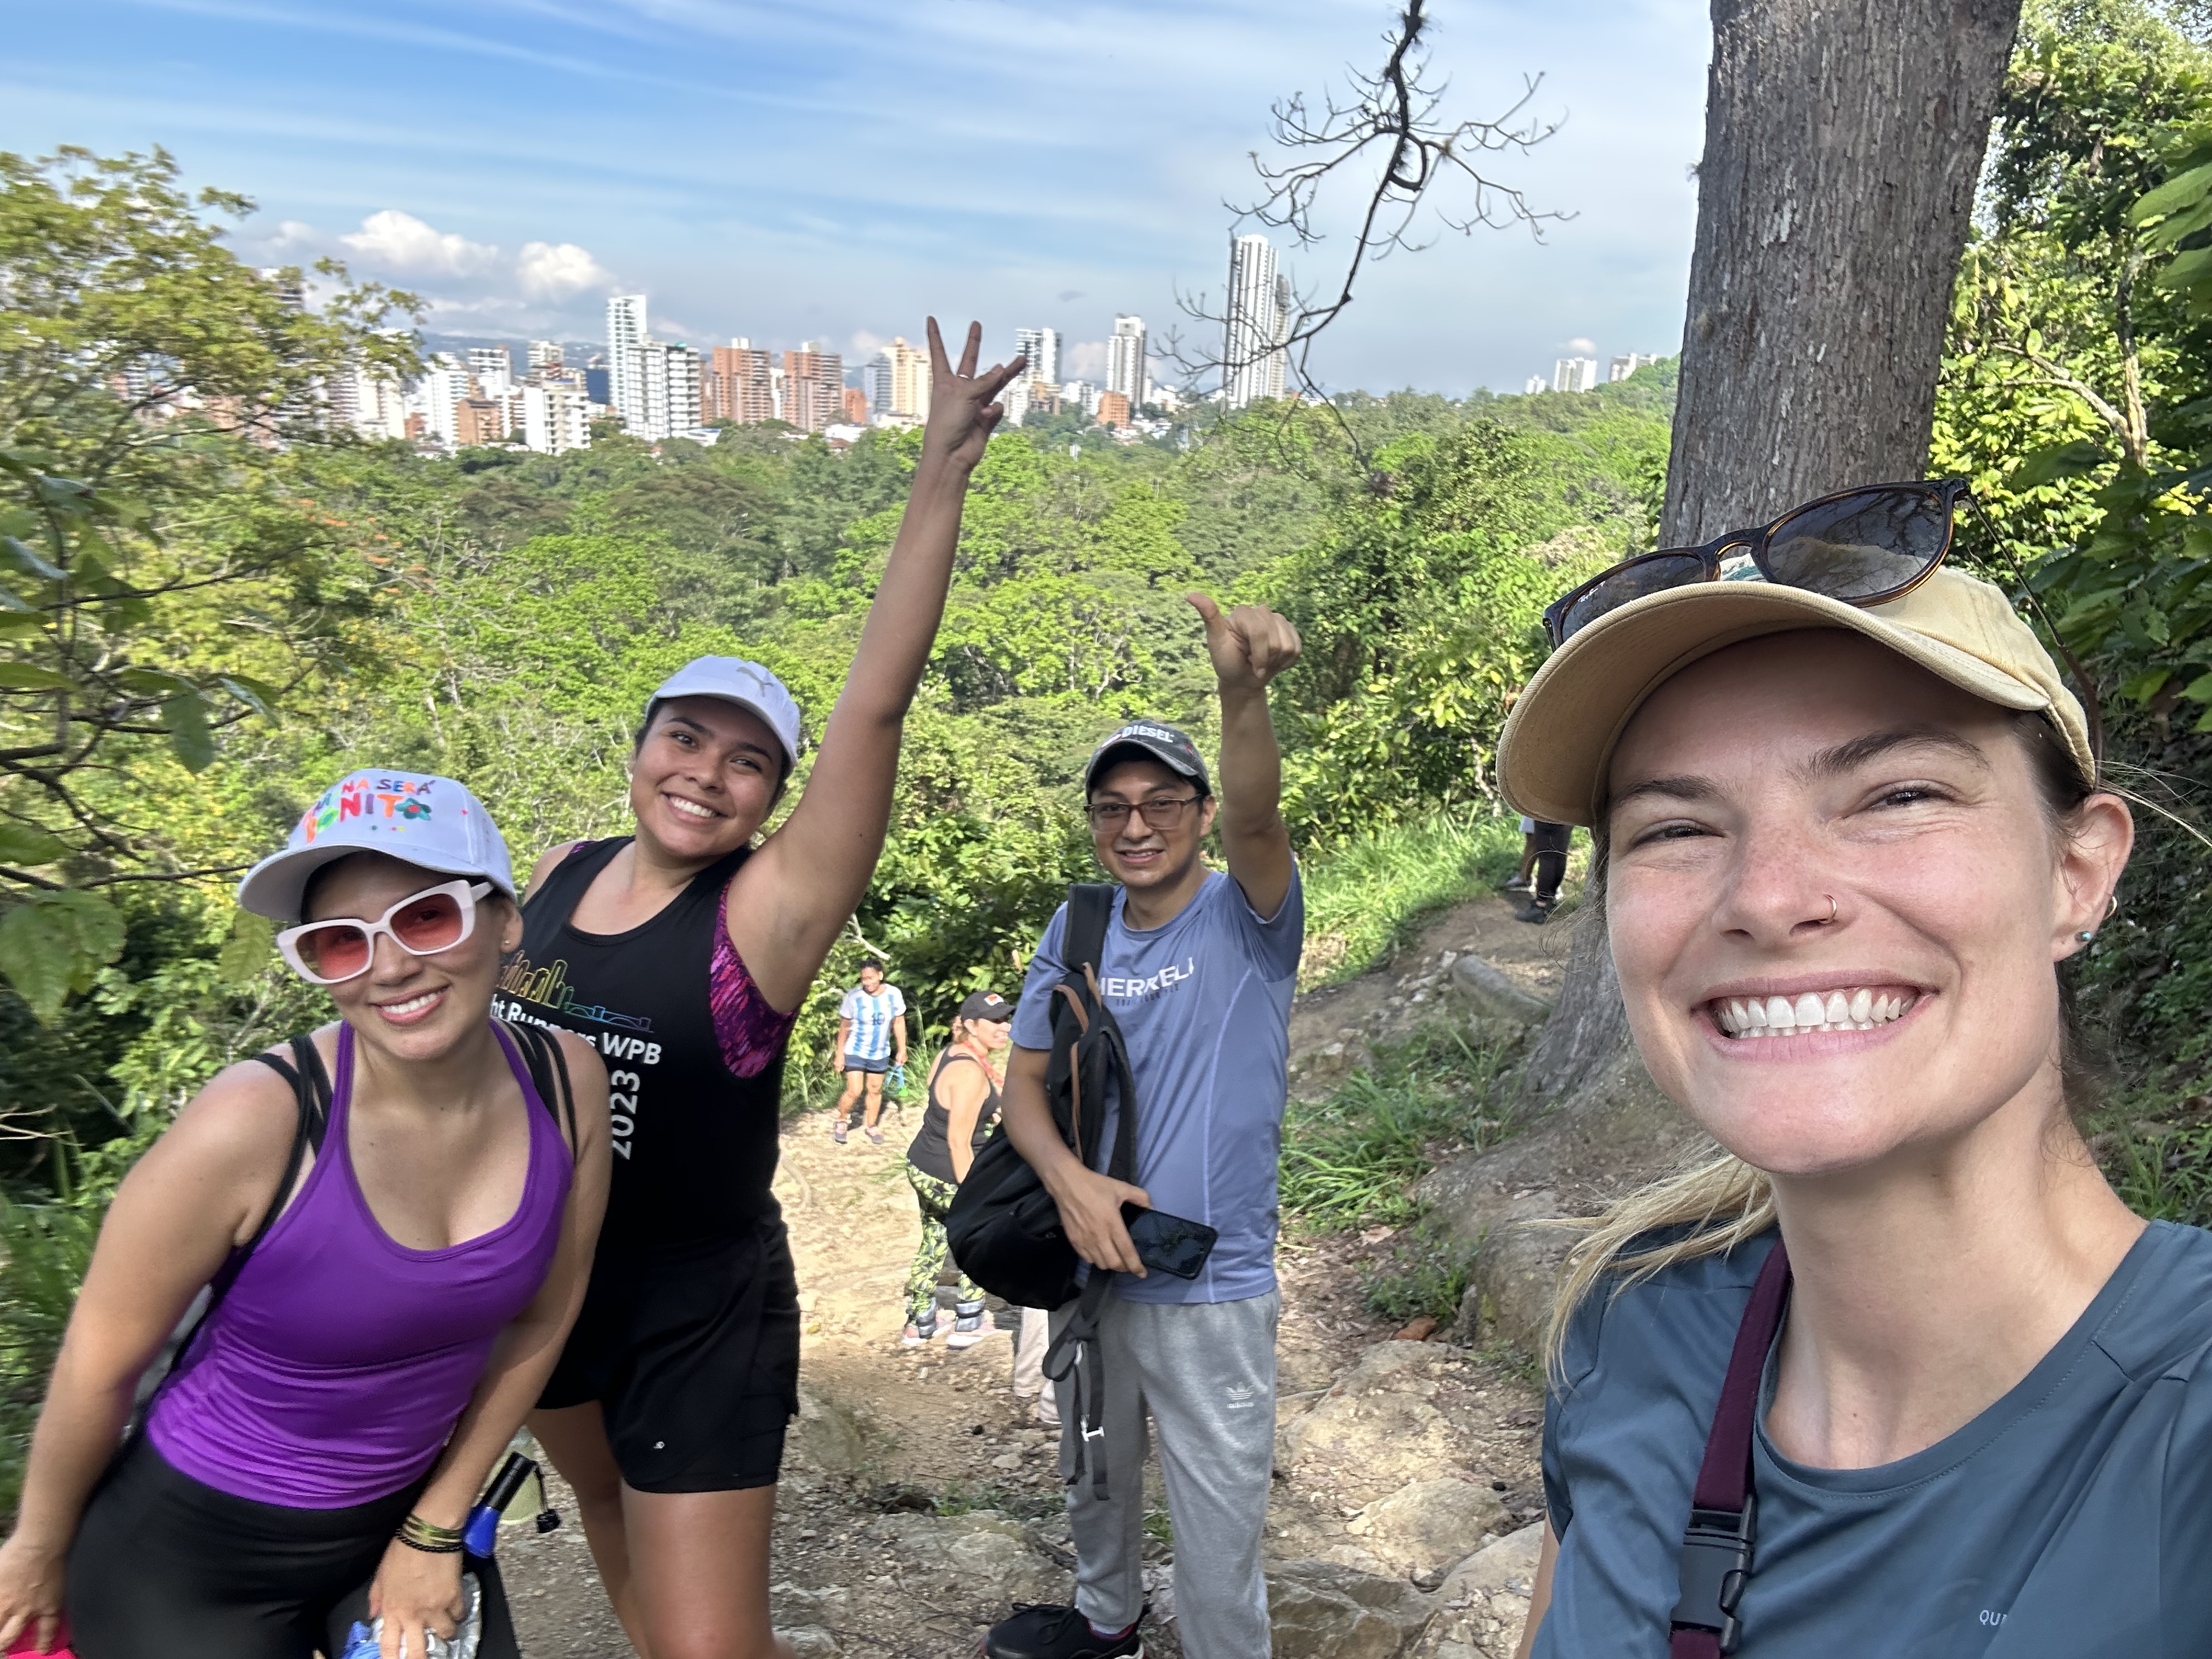 Ellen Cannon, pictured in front, enjoys a hike in Colombia